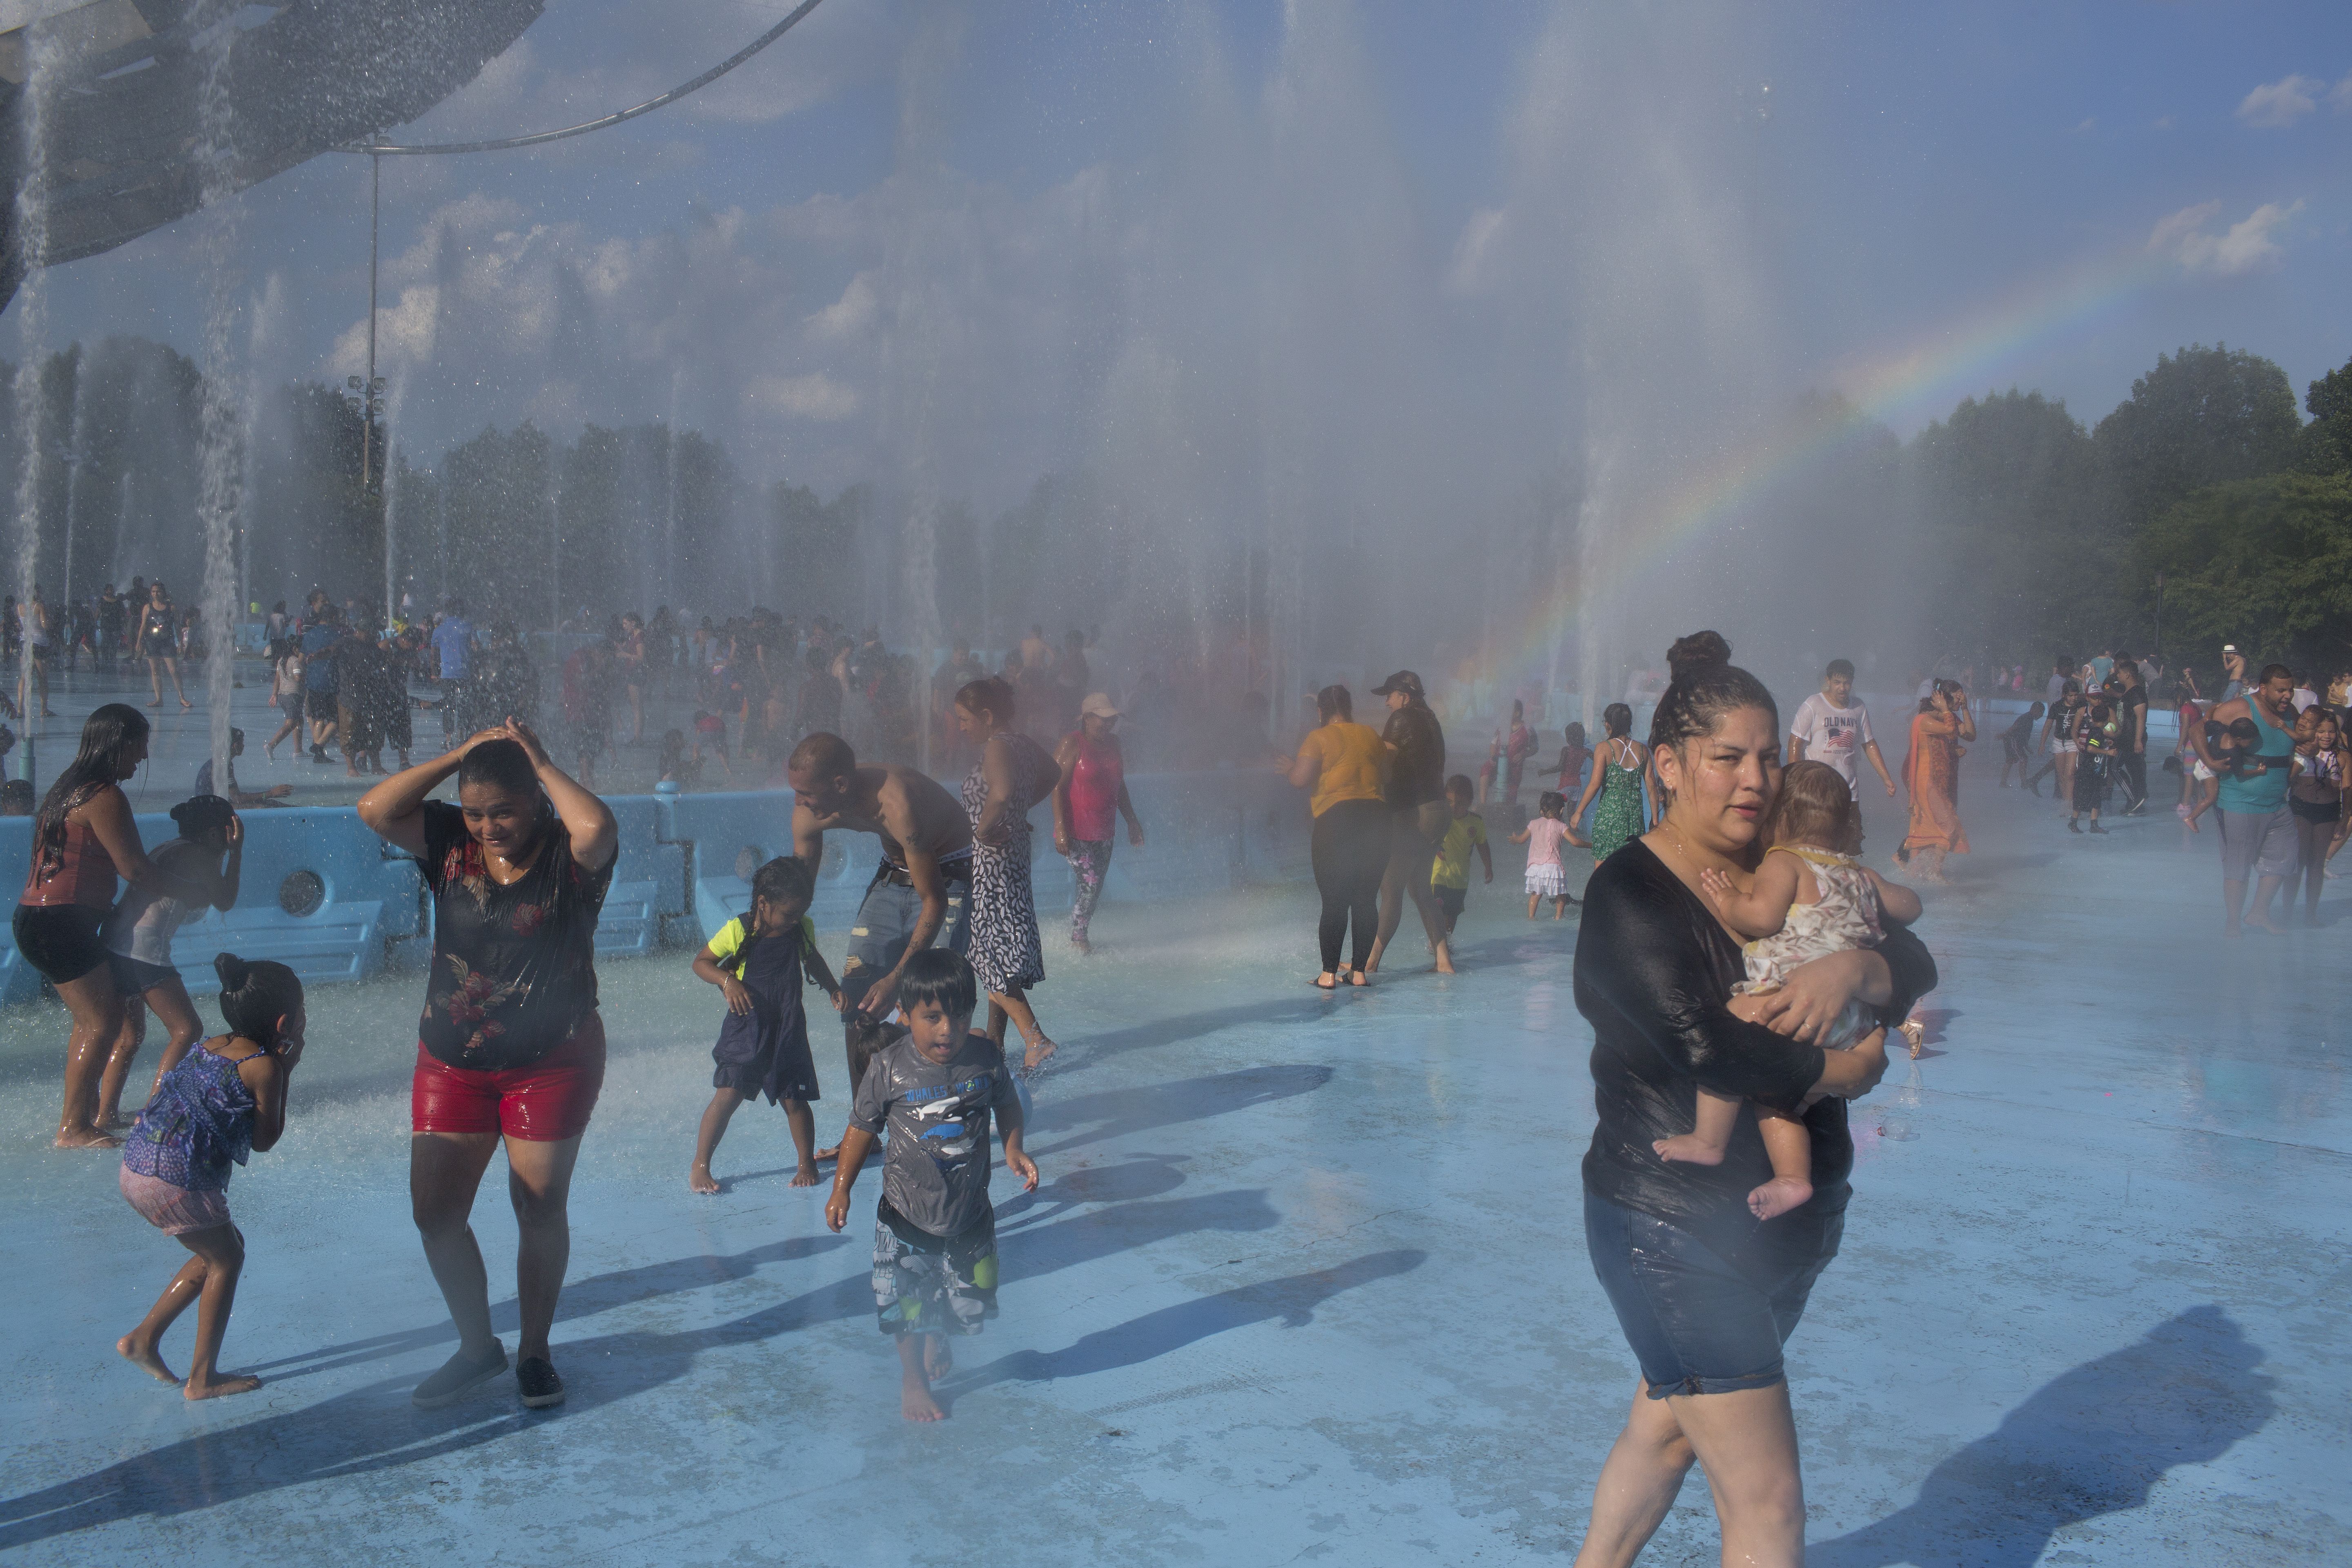 As a heat wave descends upon the city, people seek refuge from the record high temperatures at the fountains in Flushing Meadows Park on July 21, 2019 in the Queens borough of New York City